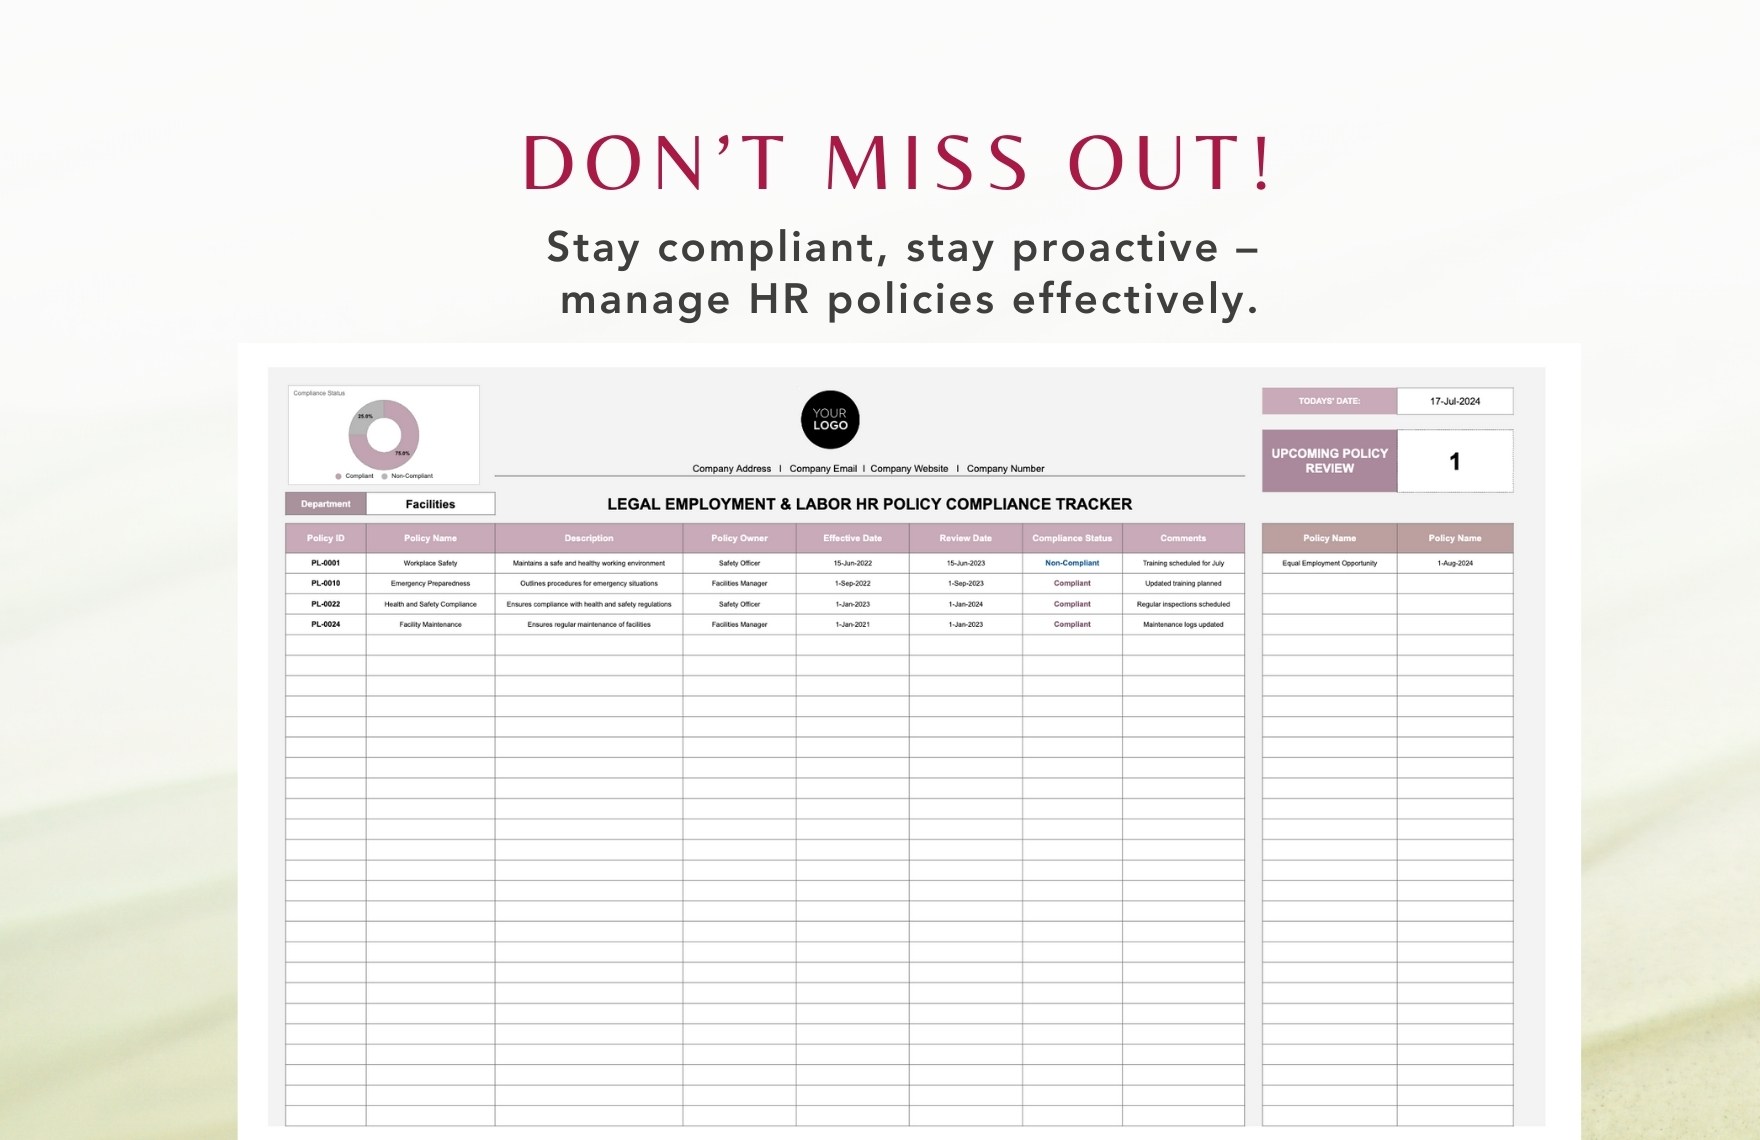 Legal Employment & Labor HR Policy Compliance Tracker Template